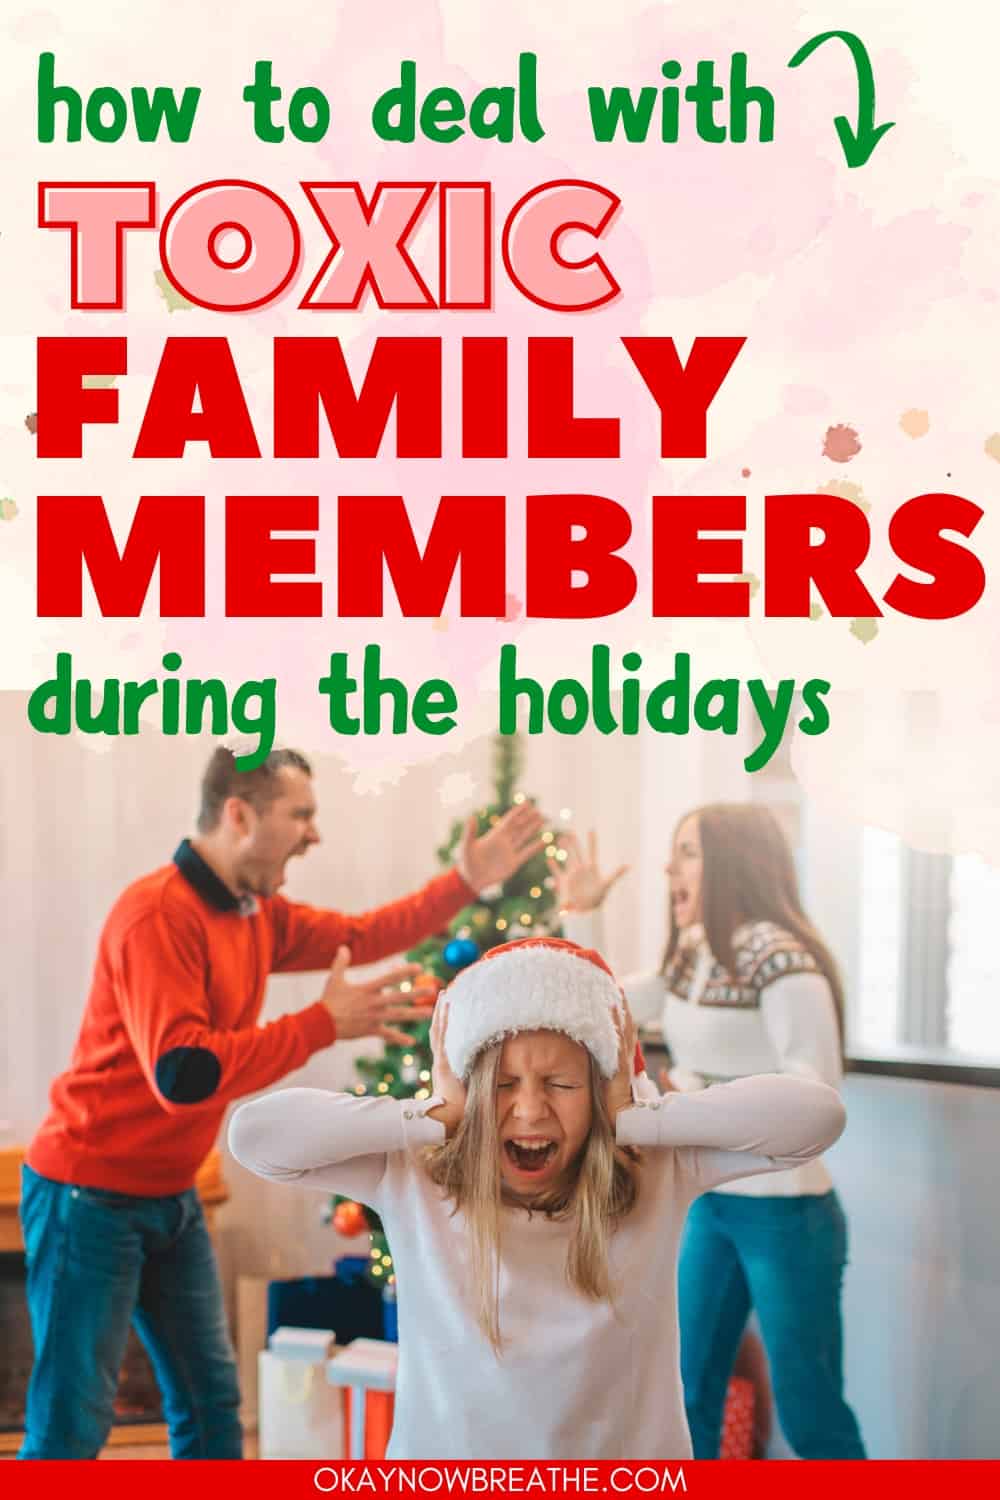 There are parents by a Christmas tree screaming. There is a girl with a Santa hat holding her ears and screaming. Above him, there's text: "how to deal with toxic family members during the holiday."